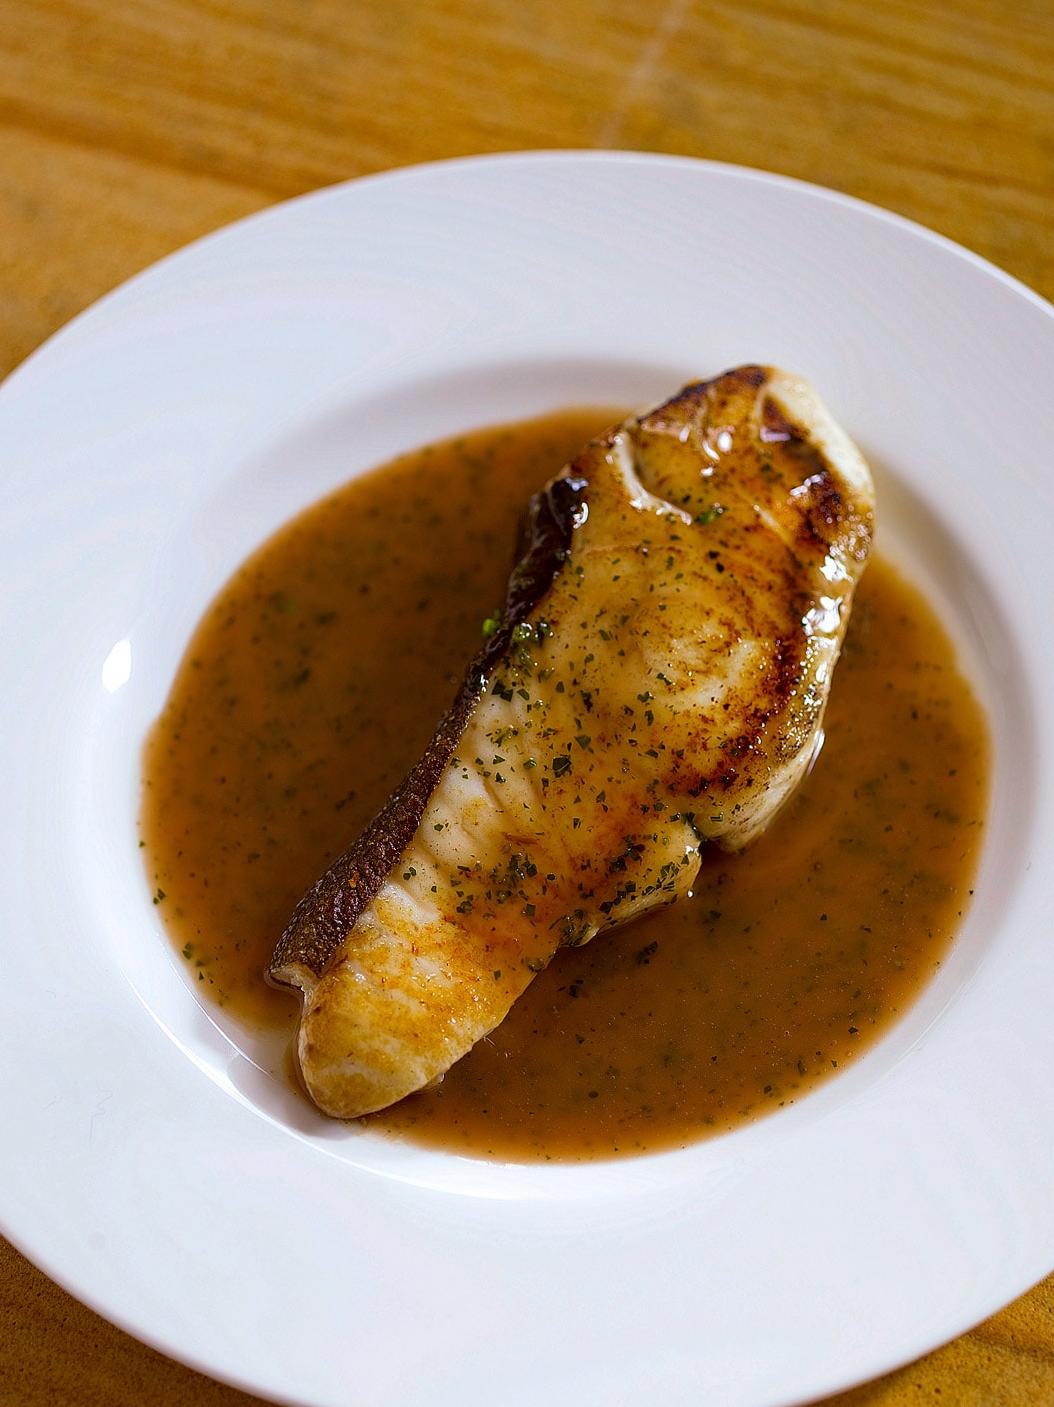  The elegance of red wine makes an exquisite sauce for fish.